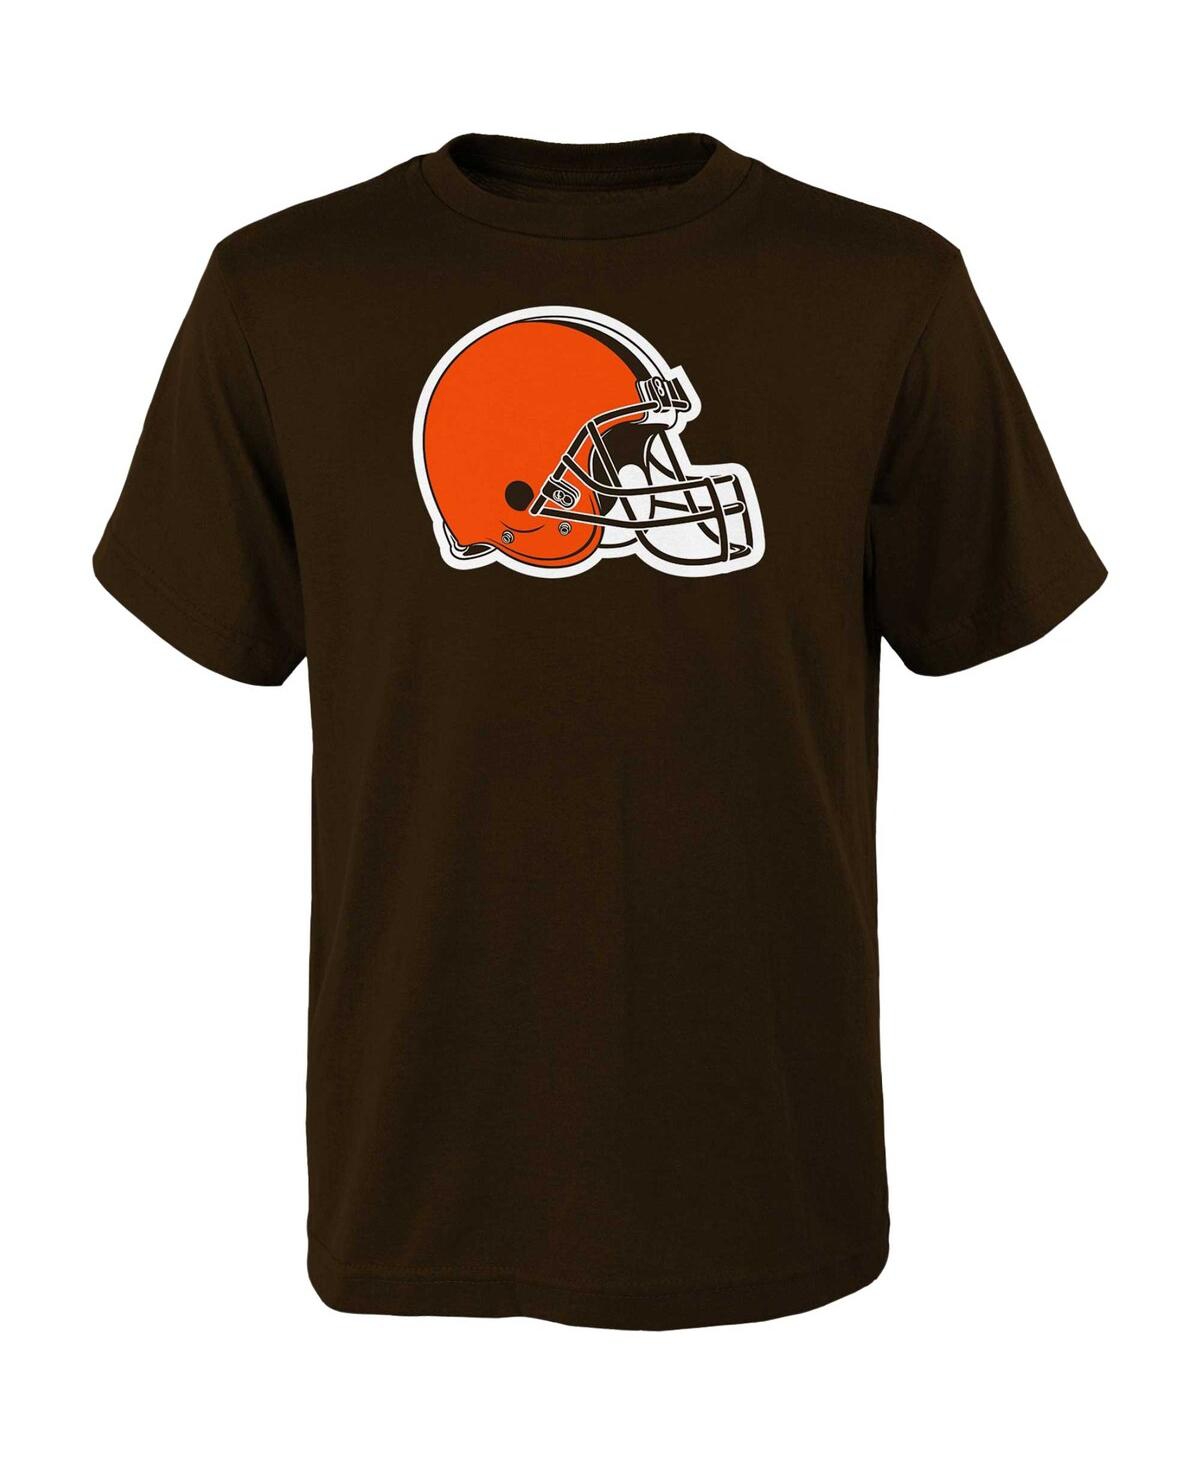 Outerstuff Kids' Big Boys Brown Cleveland Browns Primary Logo T-shirt